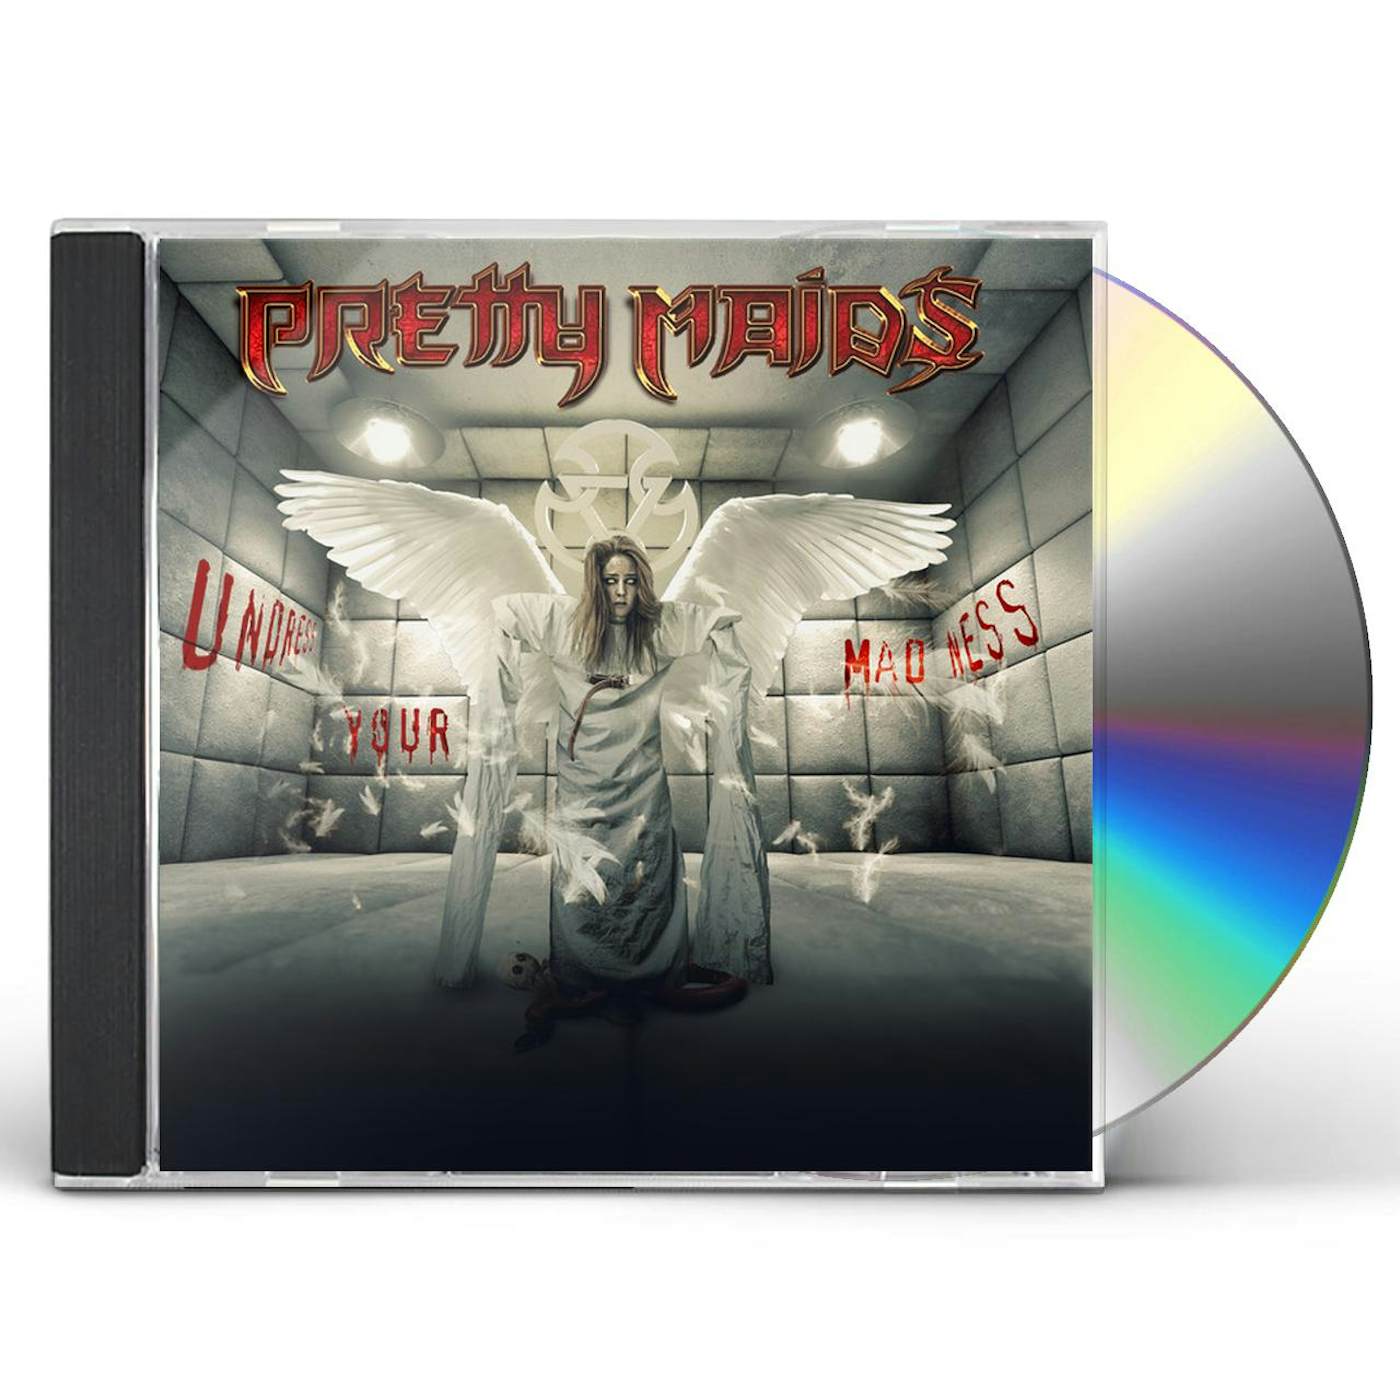 Pretty Maids UNDRESS YOUR MADNESS CD